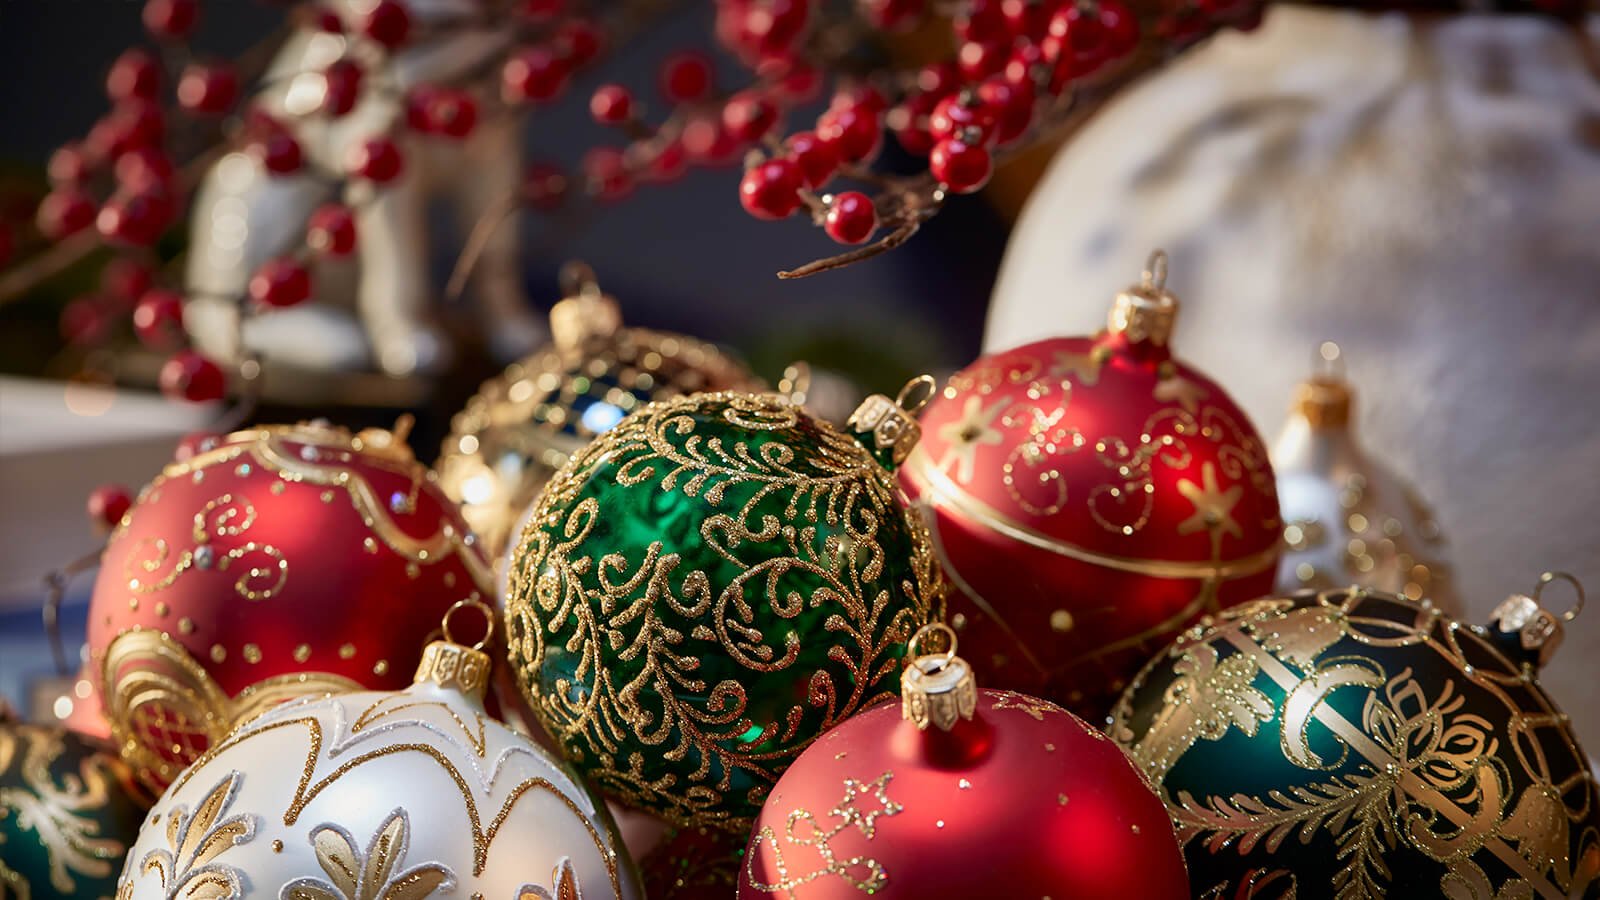 Christmas Baubles - Exclusively selected baubles - Newport